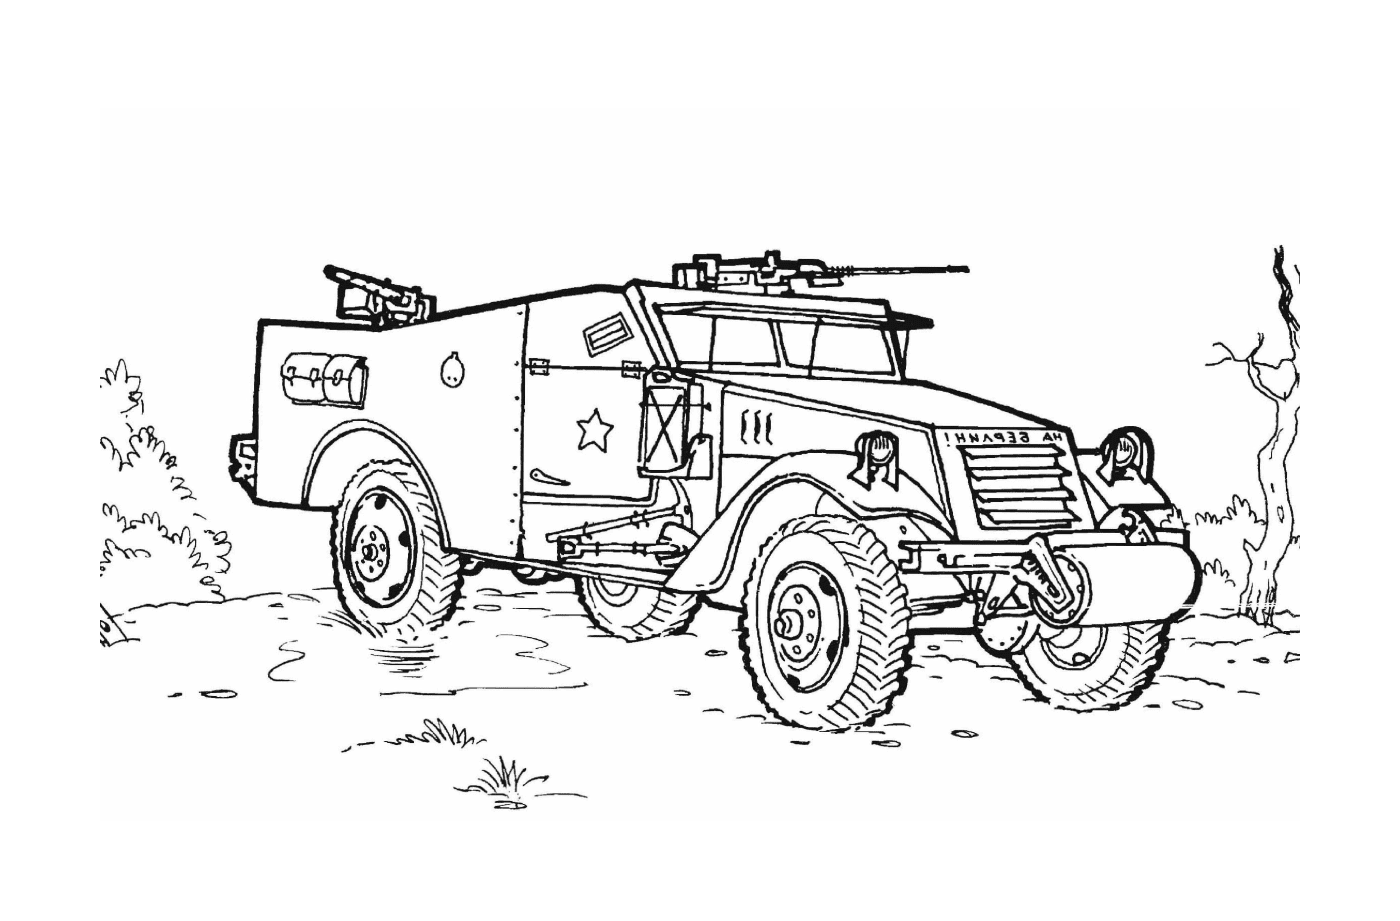  Military vehicle with weapons: an old military vehicle designed 